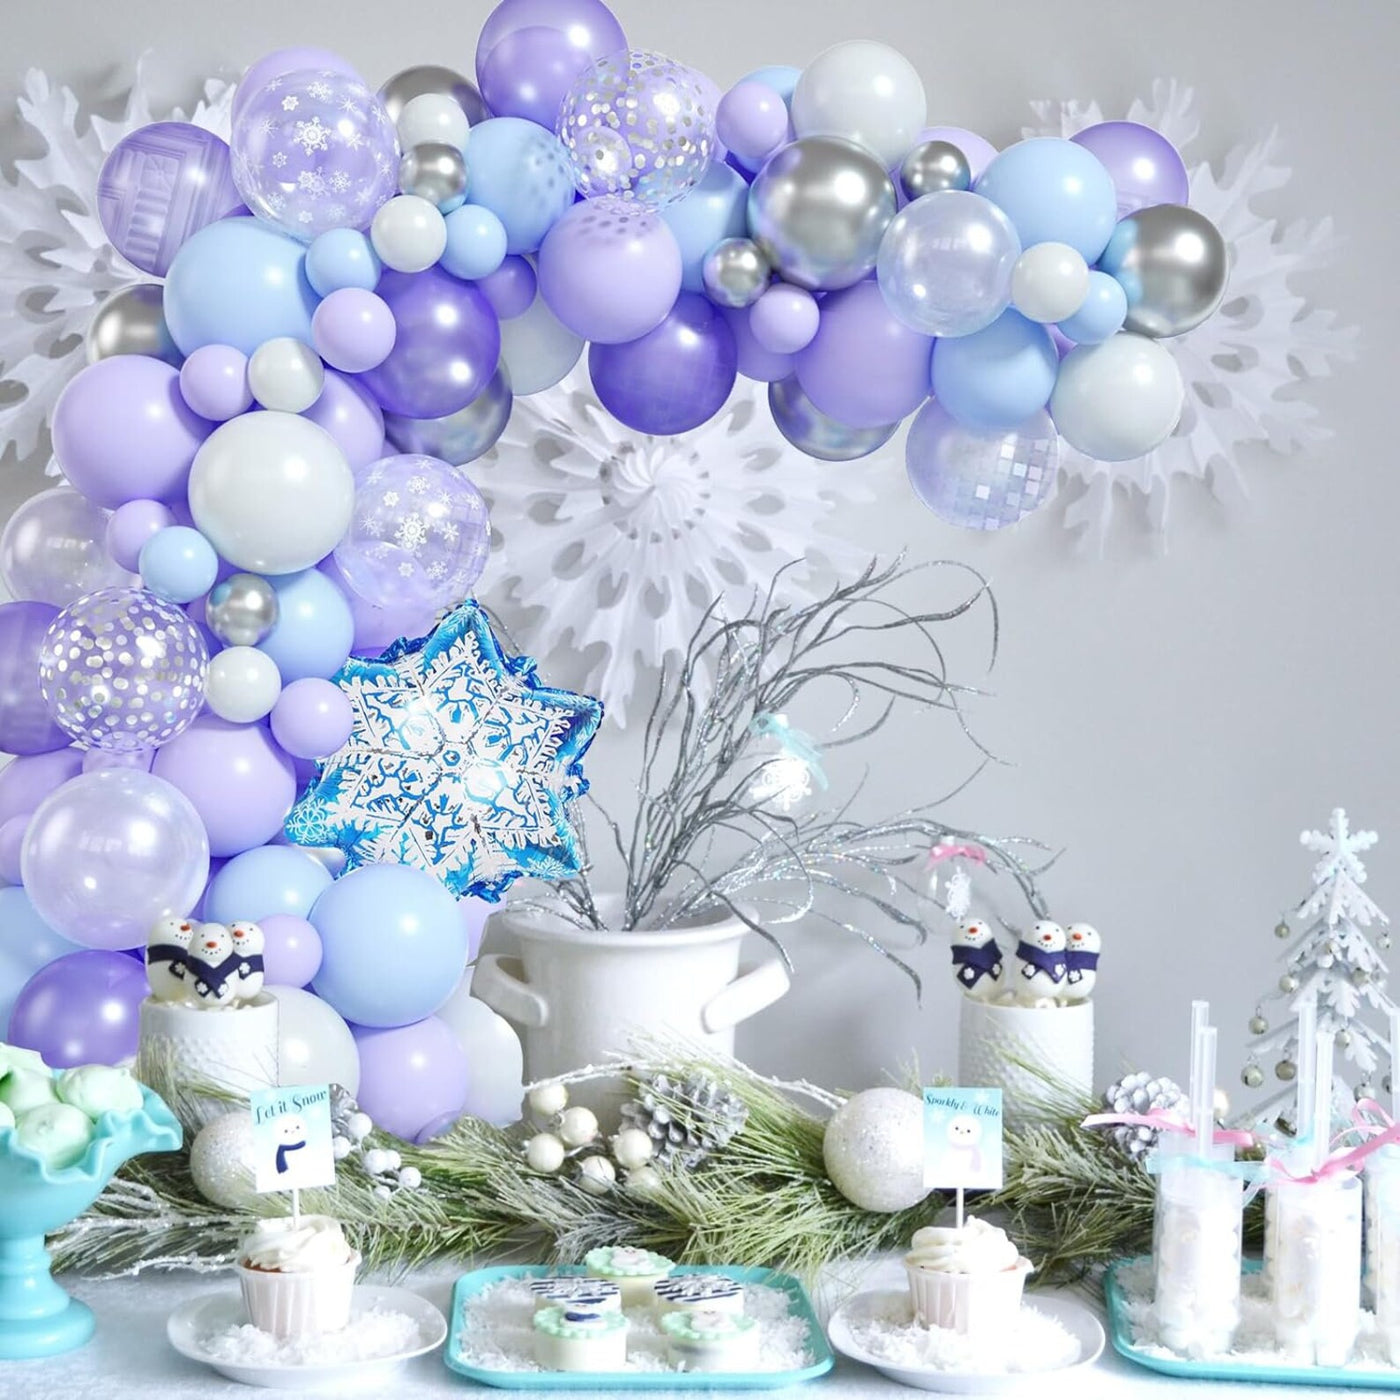 Create a magical winter wonderland with this Frozen Balloon Garland Arch Kit. Our design features carefully selected high-quality double-layered pastel purple, blue and white balloons with thick pearl white and purple balloons to ensure long-lasting, visually stunning decor that will elevate any occasion such as frozen-themed birthday parties, baby showers, and kid birthdays celebrations.